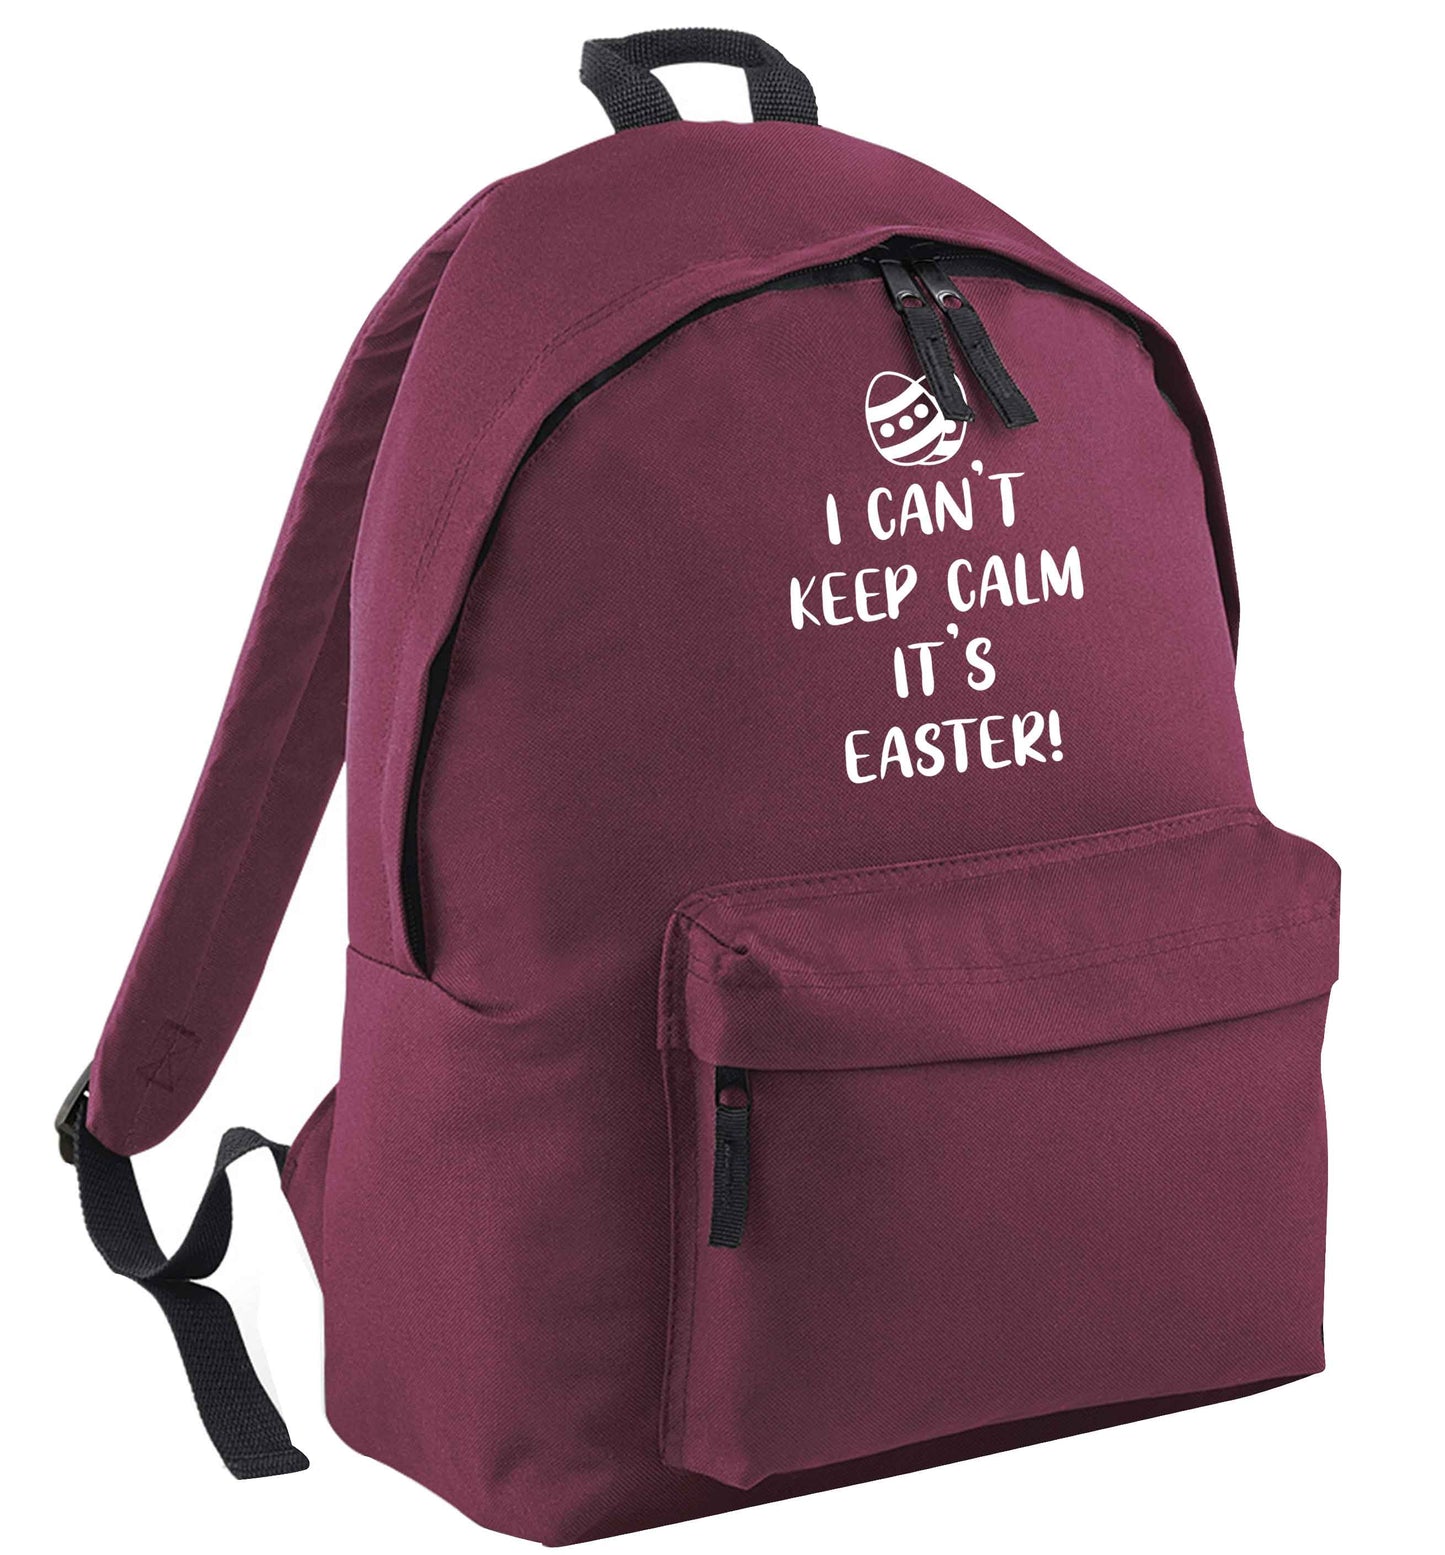 I can't keep calm it's Easter maroon adults backpack